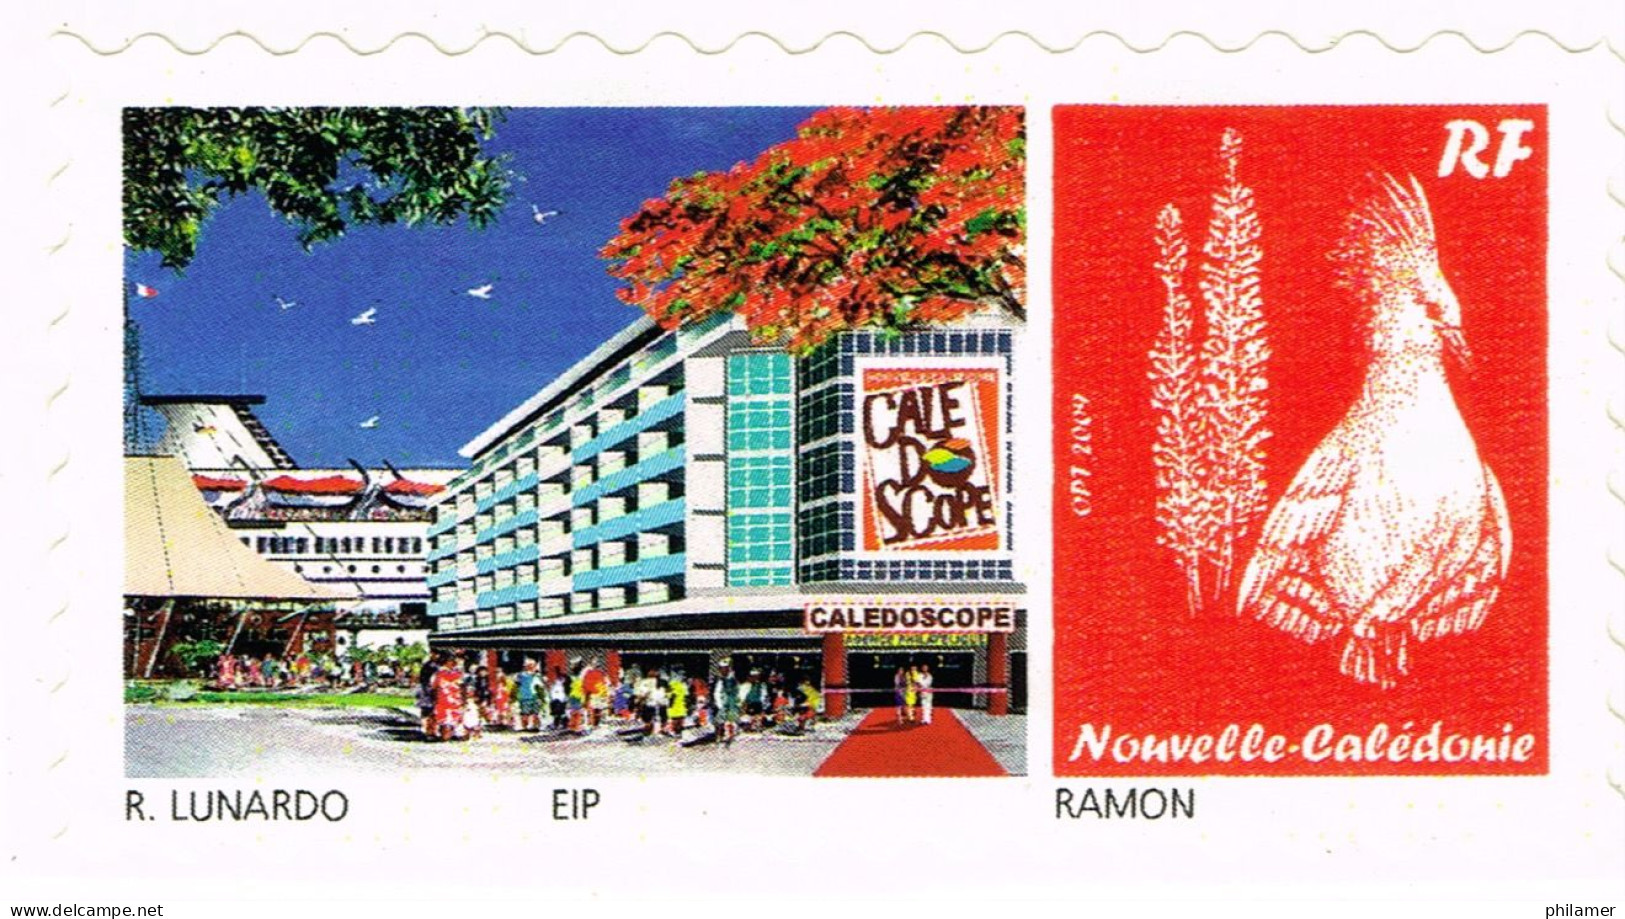 NOUVELLE CALEDONIE NEW CALEDONIA Timbre A Moi Personnalis Public YT 1187 TPNC21 Caledoscope 2012 Ramon Neuf B - Neufs